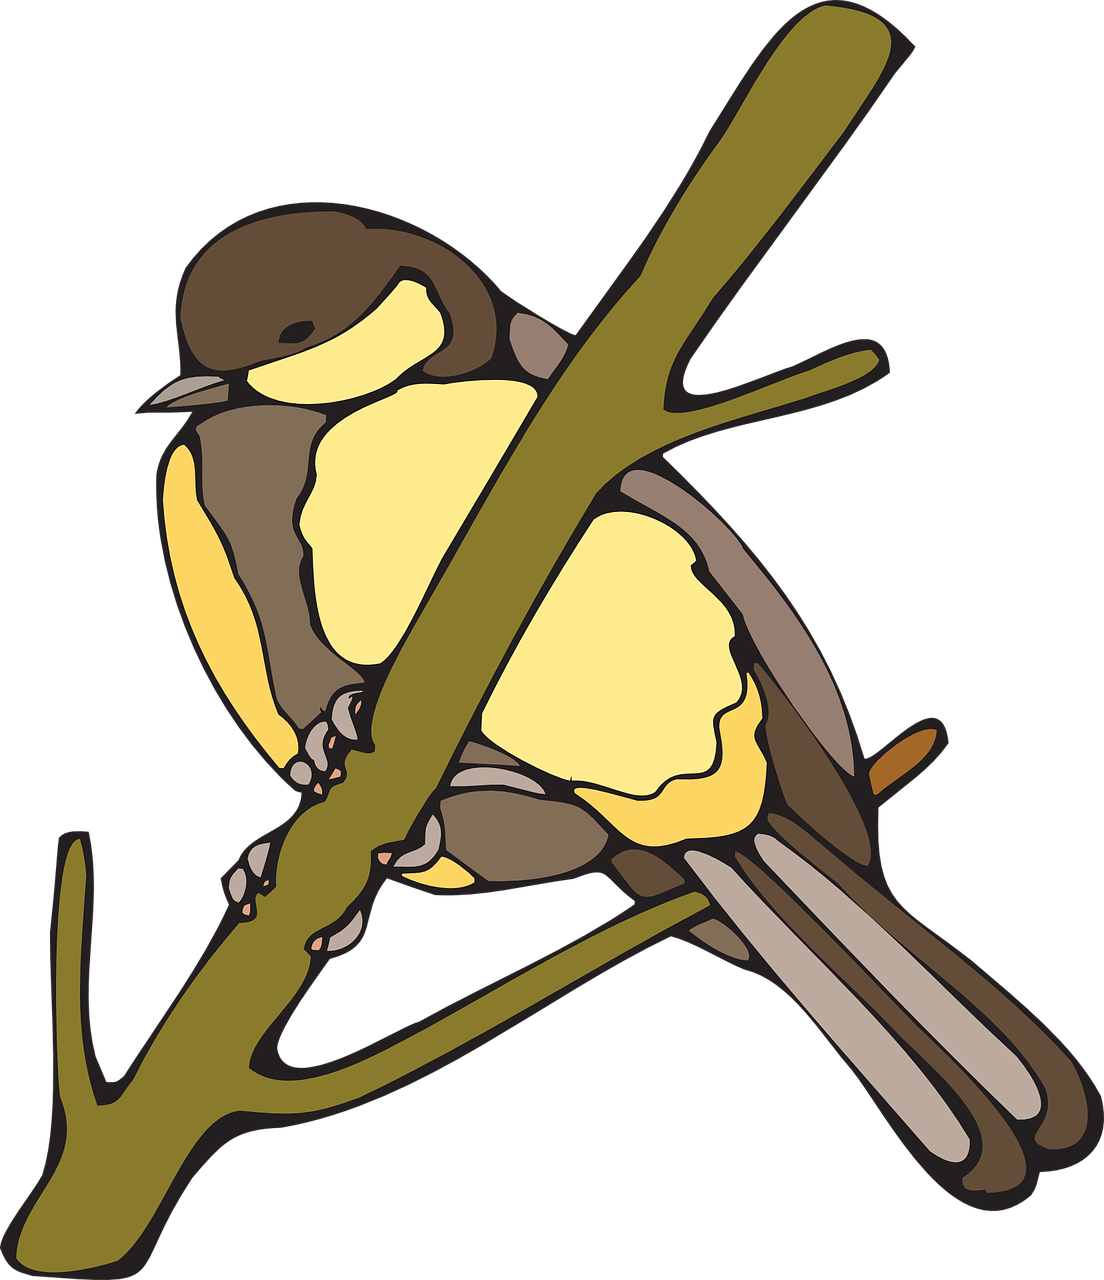 yellow,bird,branch,nut,hatch,wings,beak,feathers,perched,free vector graphics,free pictures, free photos, free images, royalty free, free illustrations, public domain